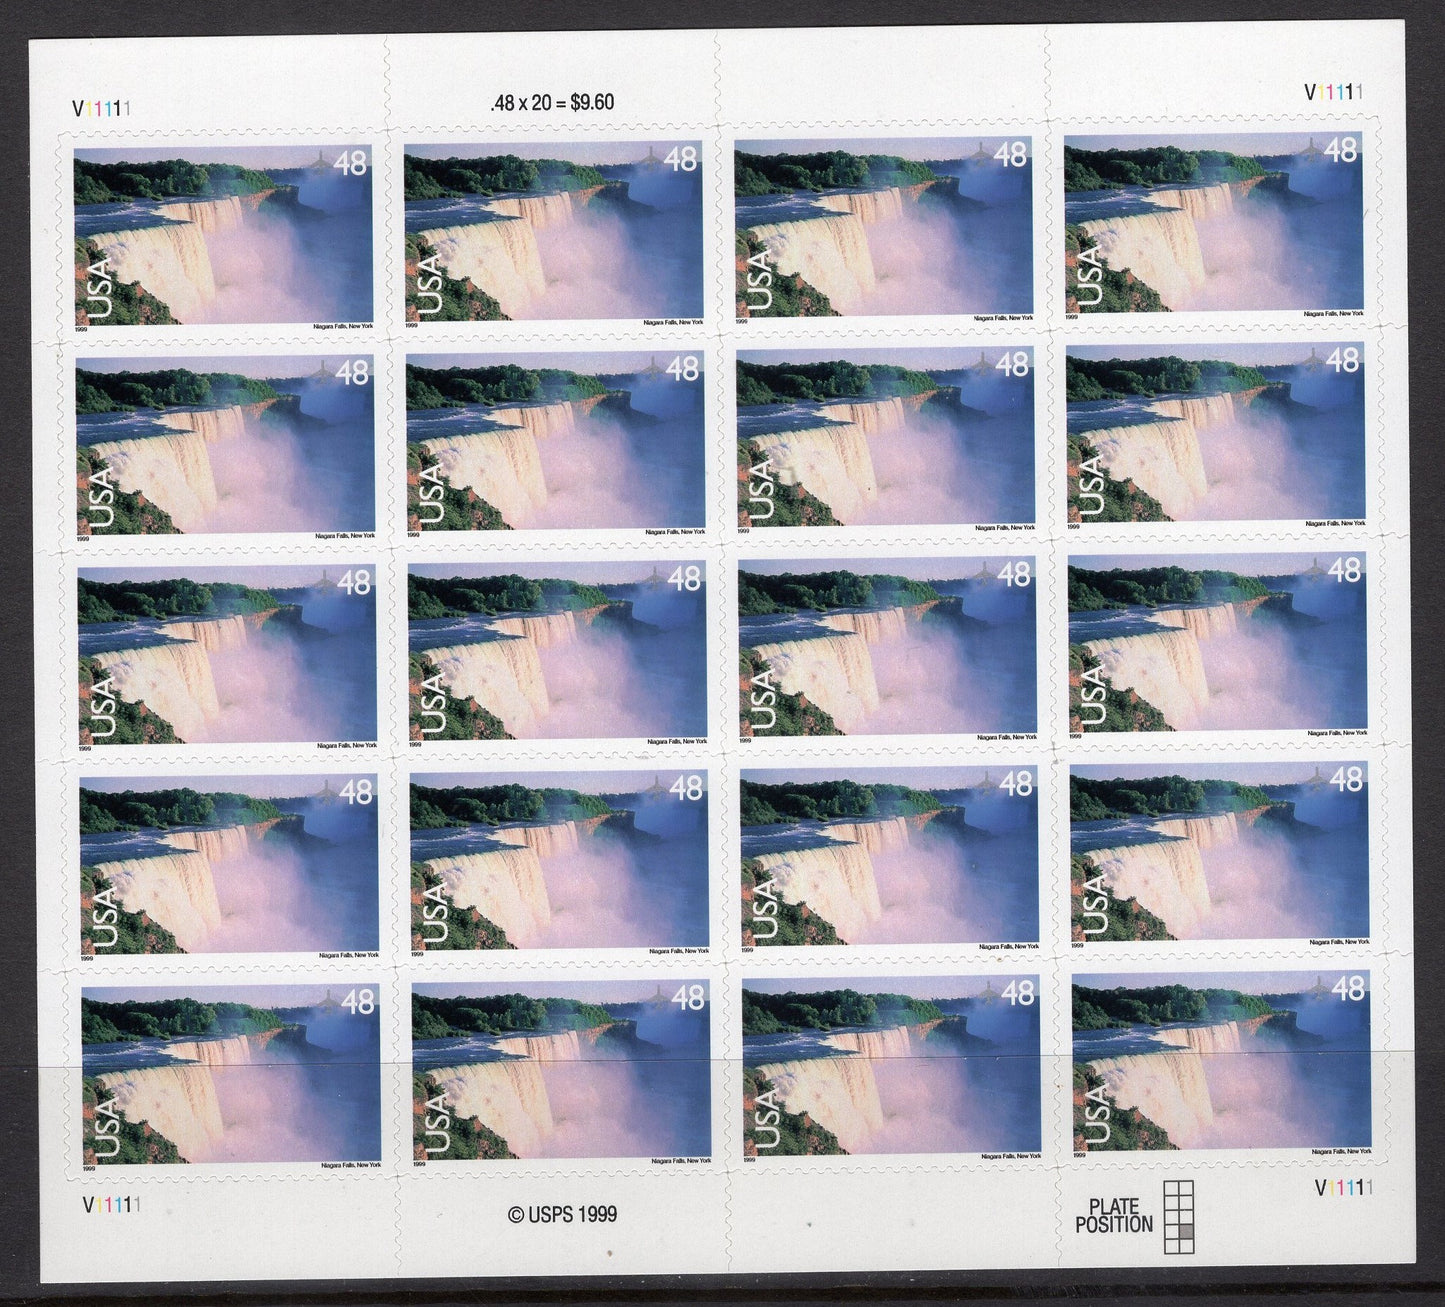 NIAGARA FALLS NY Sheet of 20 Scenic USA Landscapes Stamps - Unused, Fresh, Bright Post Office - Issued in 1999 - sC133 M -